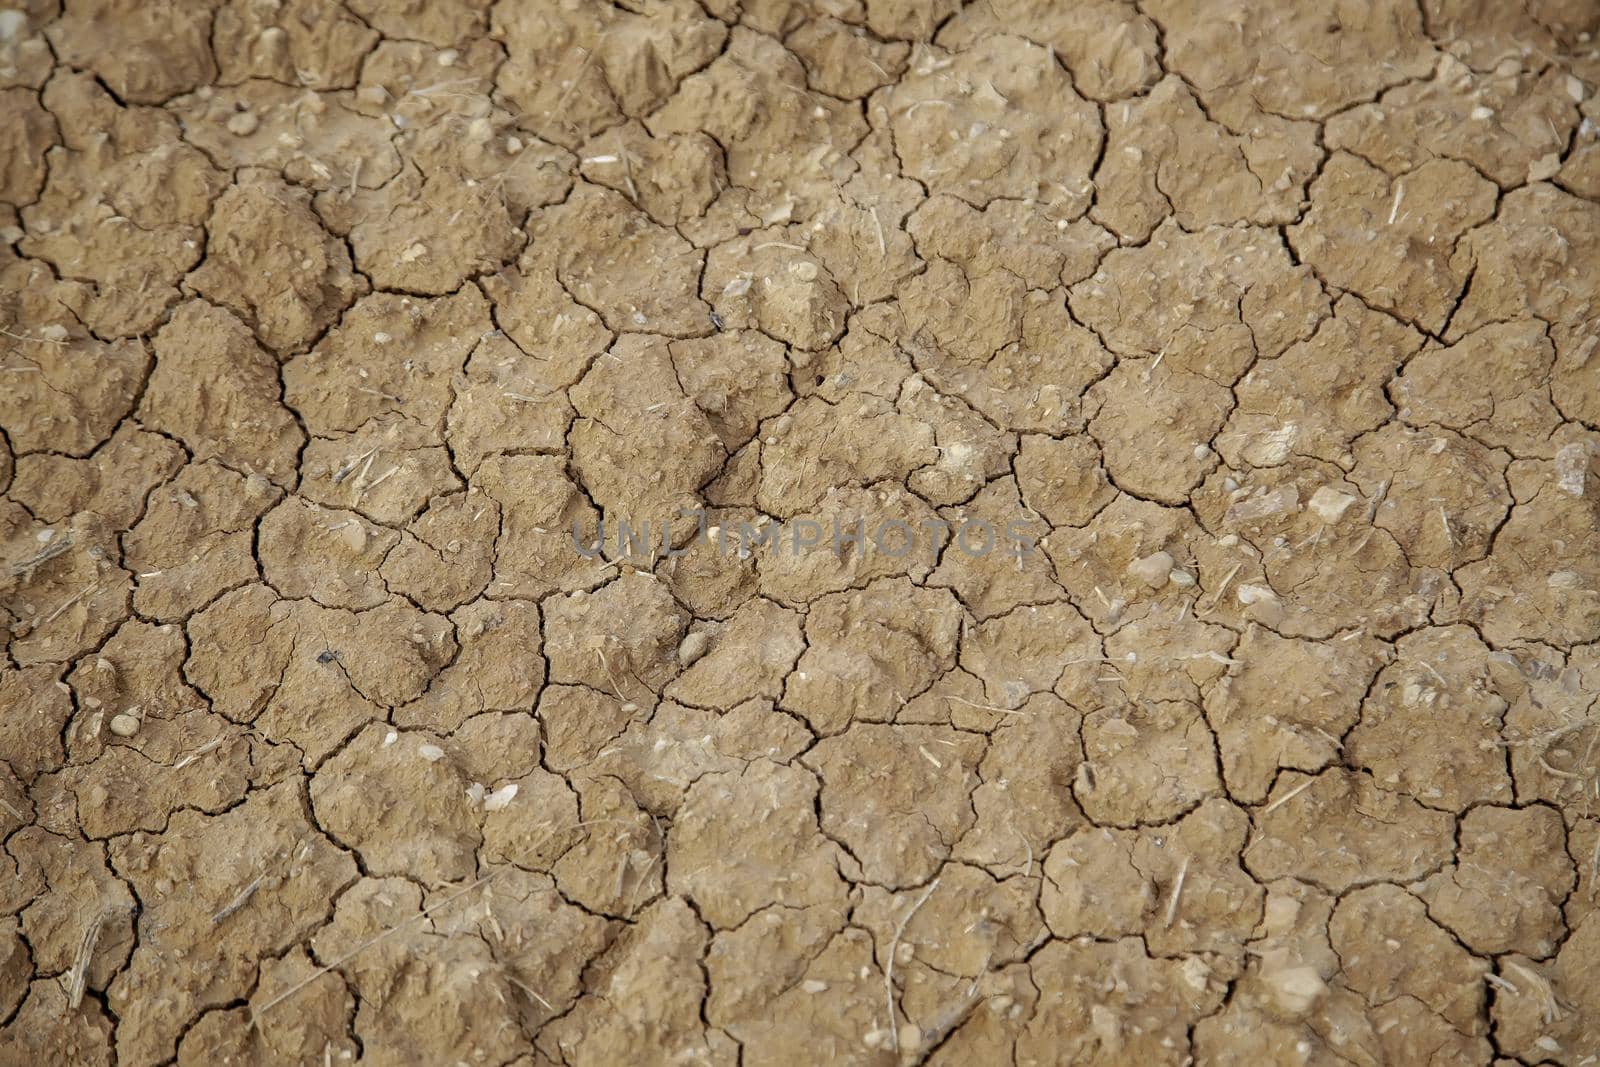 Detail of drought and climate change, desolation and destruction